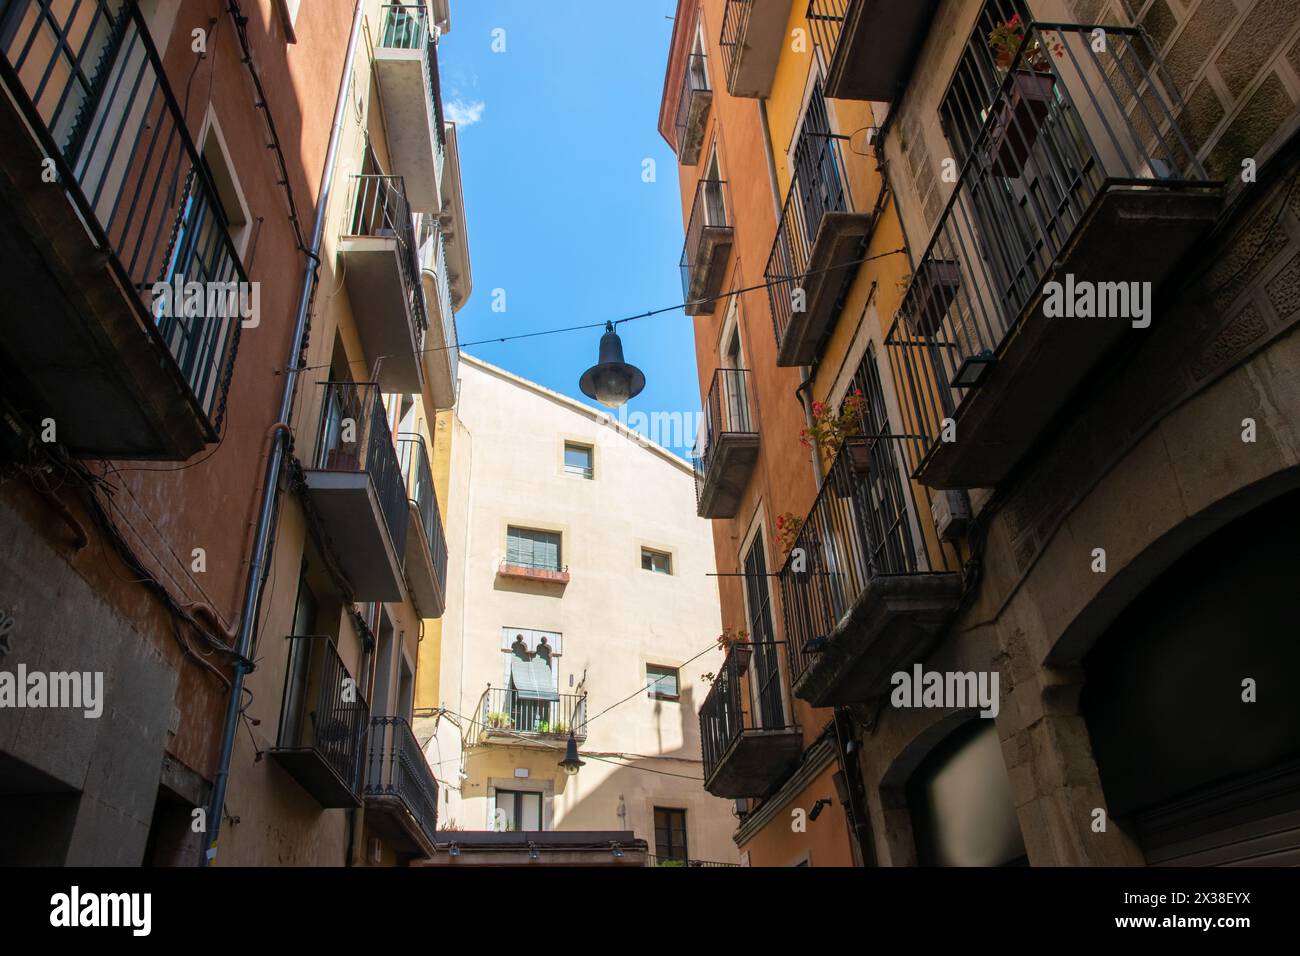 Empty street with beautiful historic houses, windows, stone road in the center of old town. Spain. Stock Photo